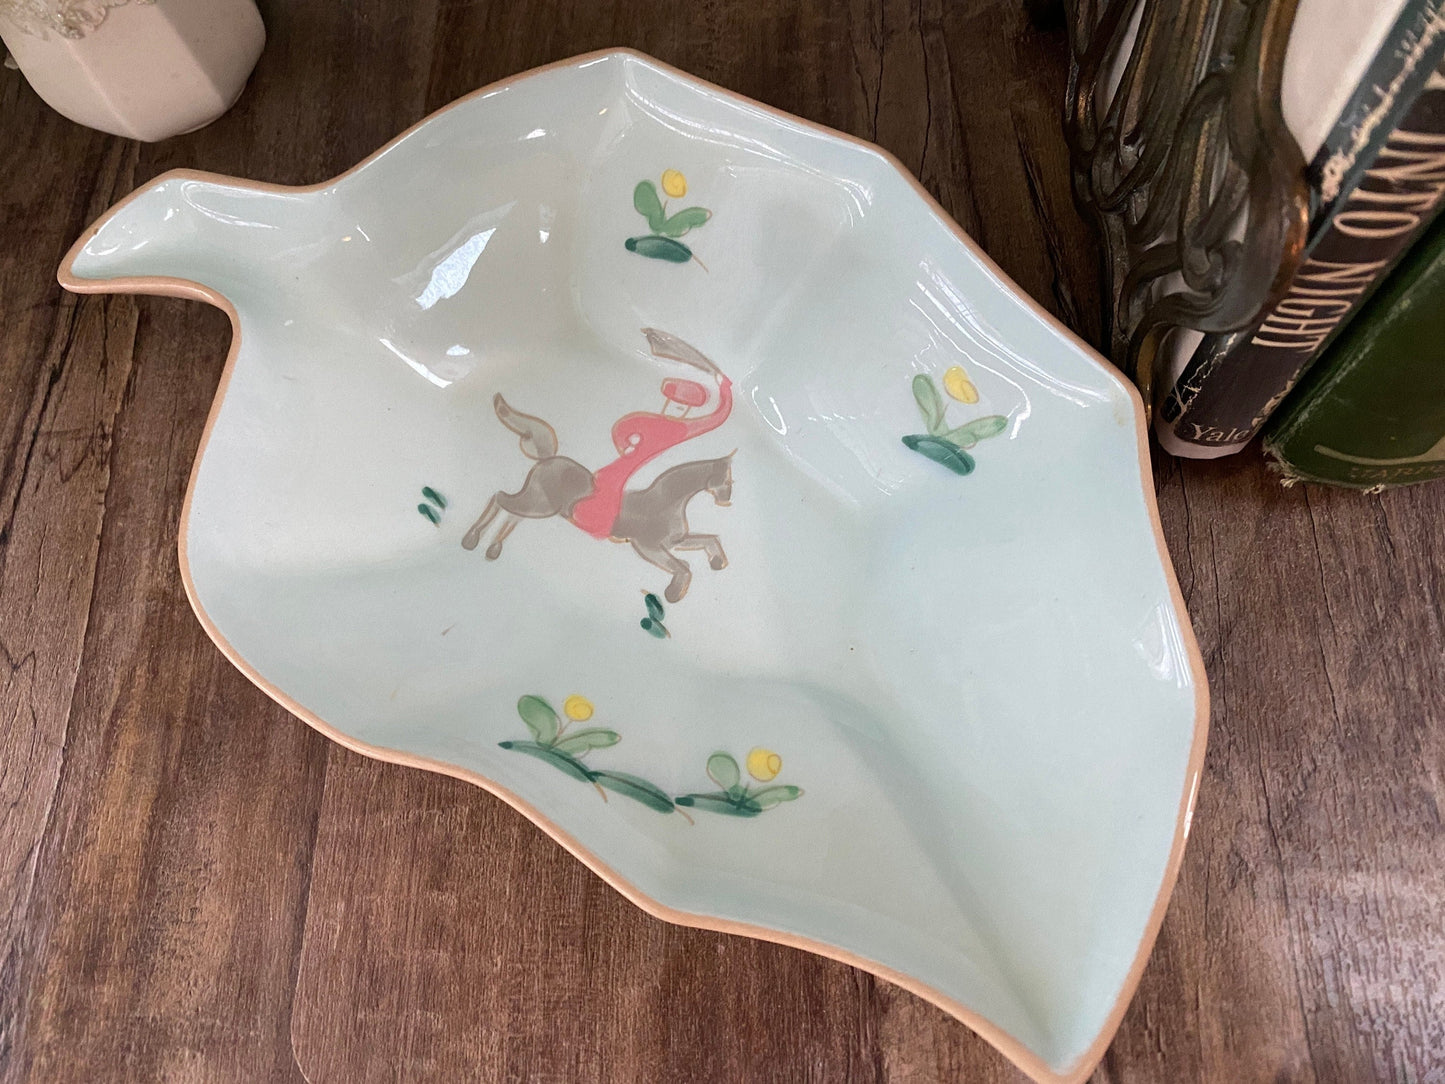 Vintage California Pottery Dish by Vally Werner